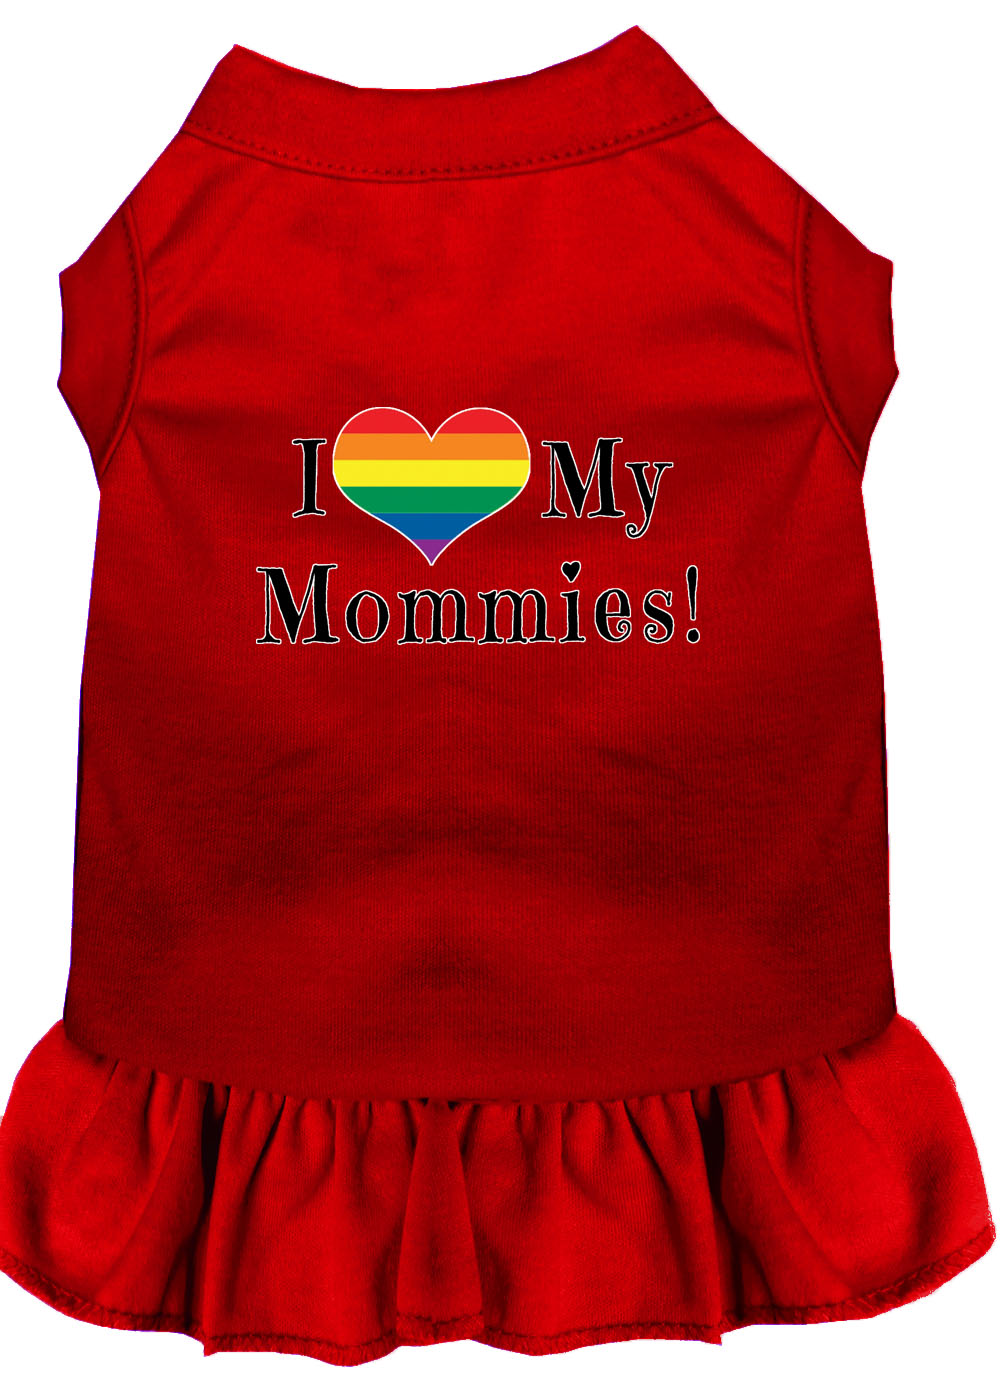 I Heart my Mommies Screen Print Dog Dress Red Med